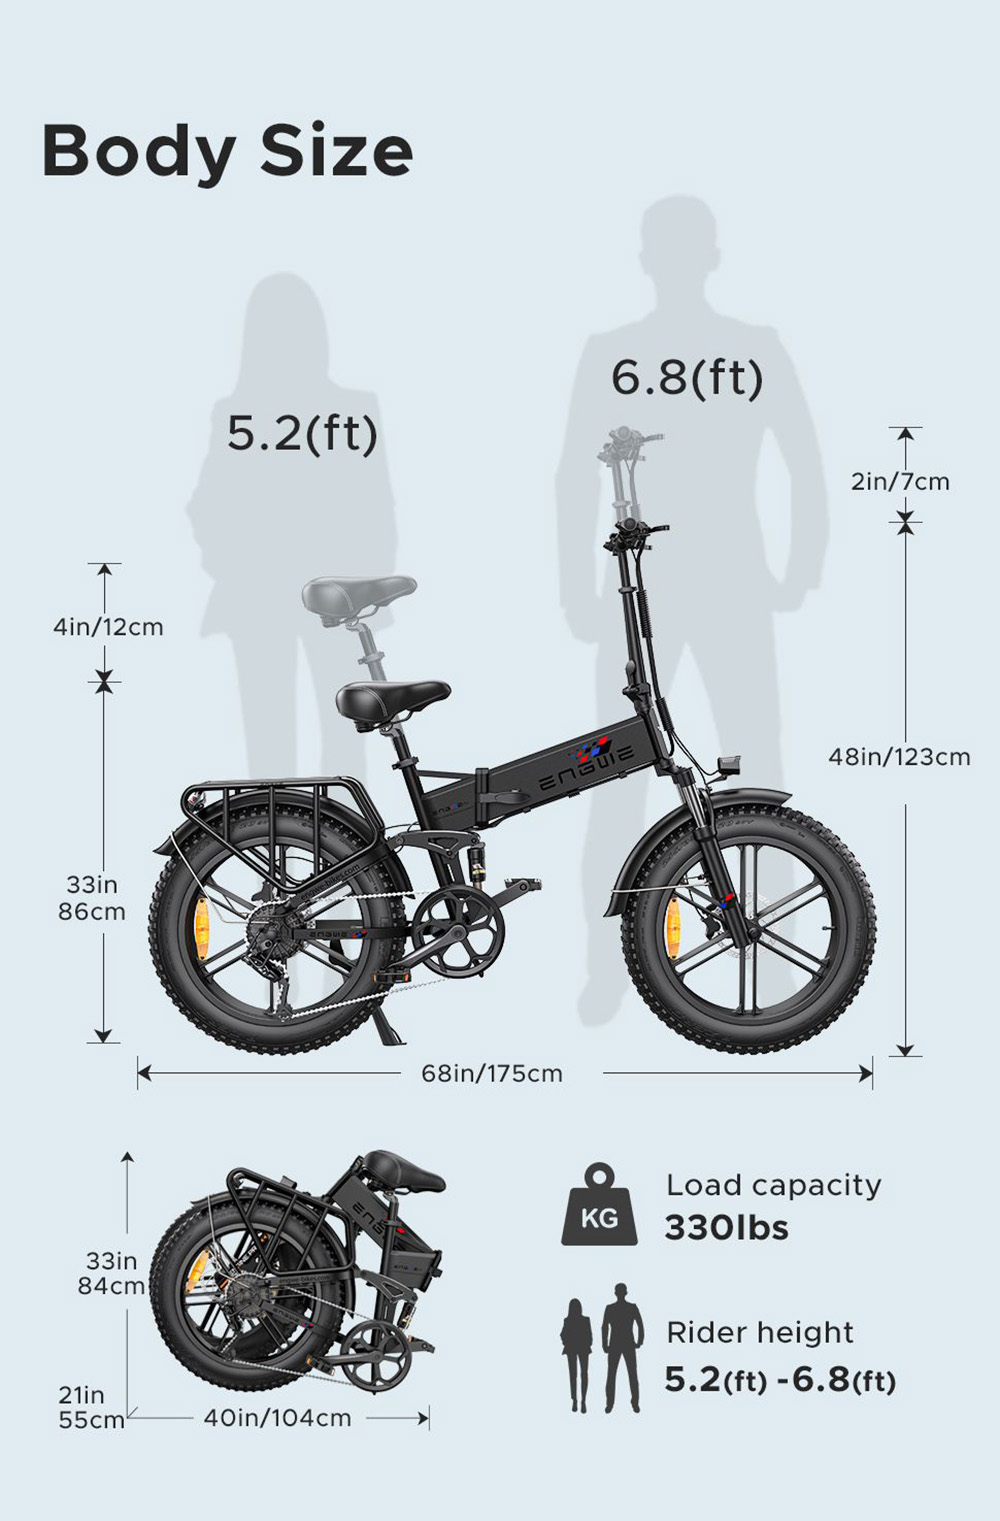 ENGWE ENGINE Pro Folding Electric Bicycle 20*4'' Fat Tire 750W Brushless Motor 48V 16Ah Battery 45km/h Max Speed - Blue